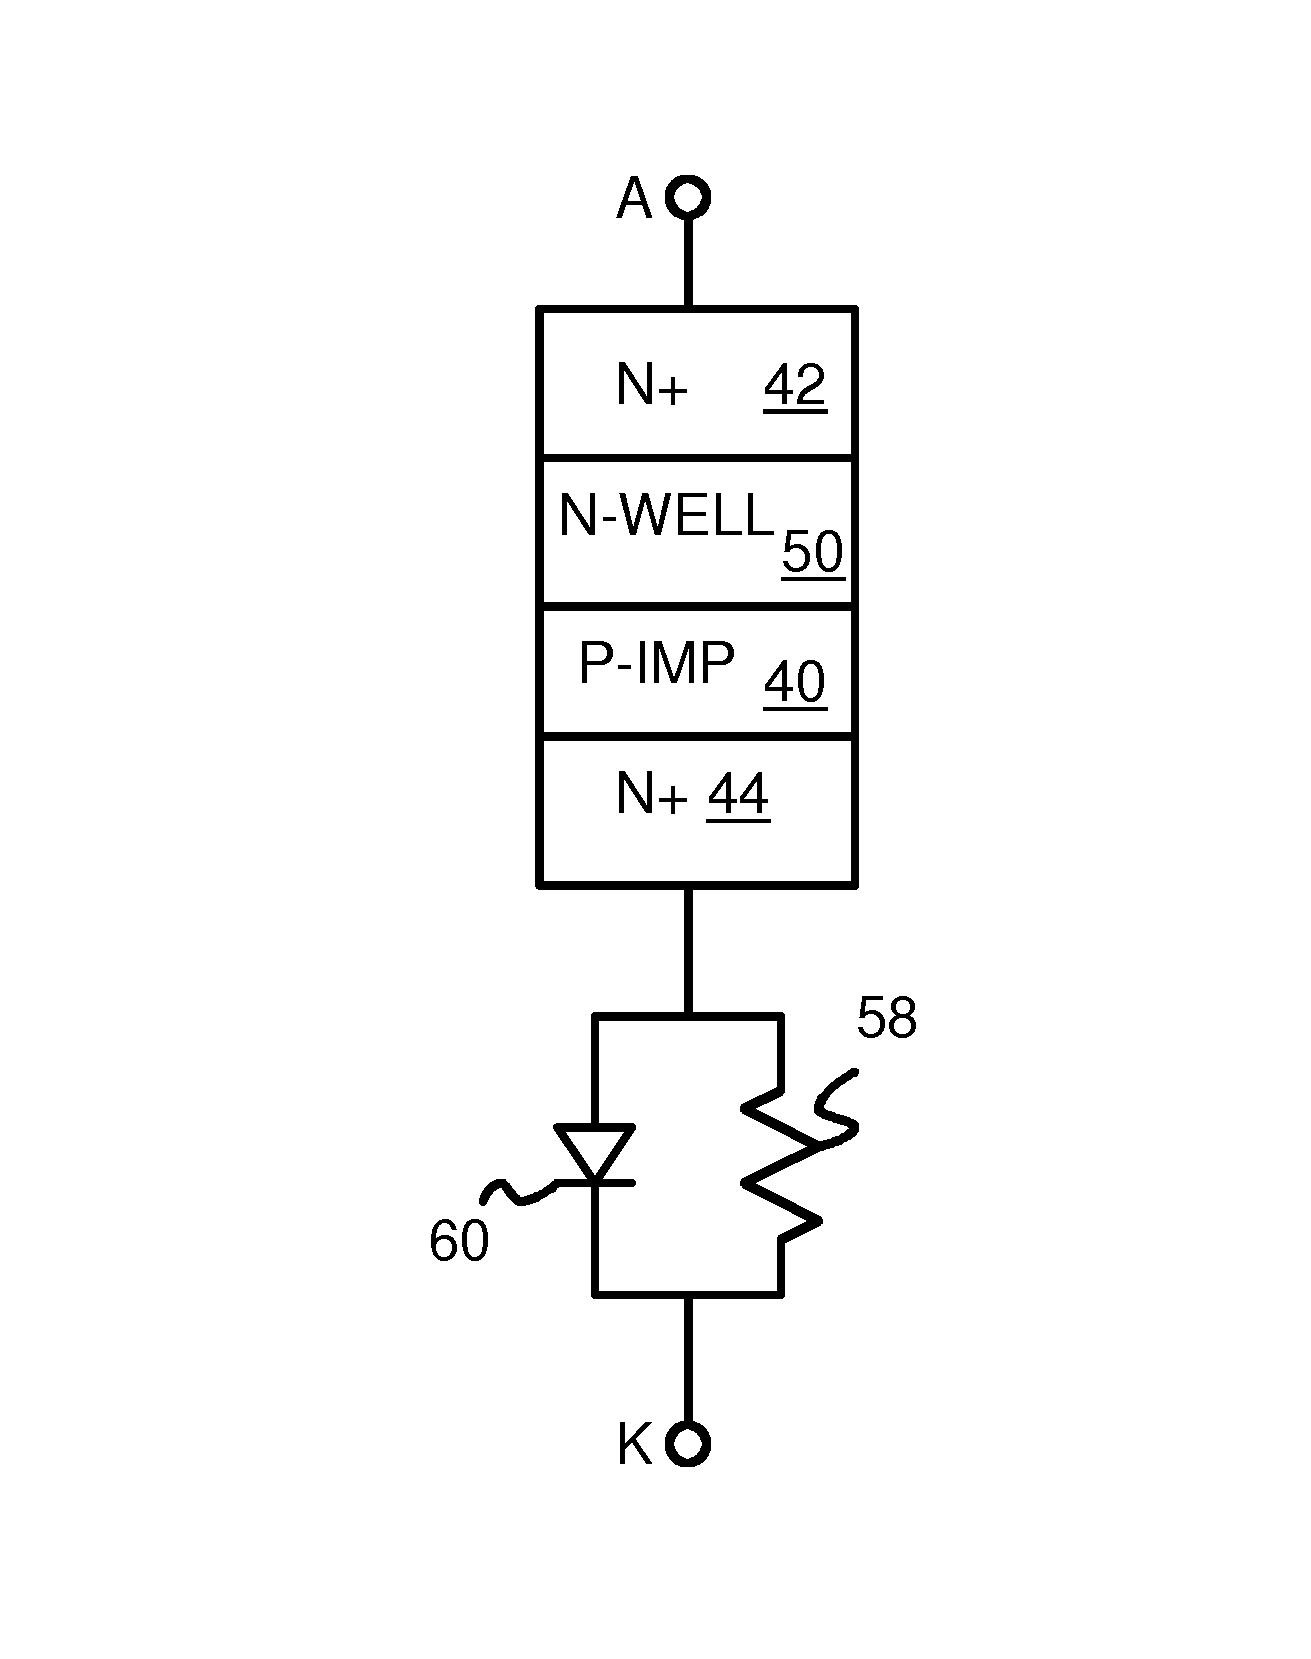 Electro-static-discharge (ESD) protection structure with stacked implant junction transistor and parallel resistor and diode paths to lower trigger voltage and raise holding volatge